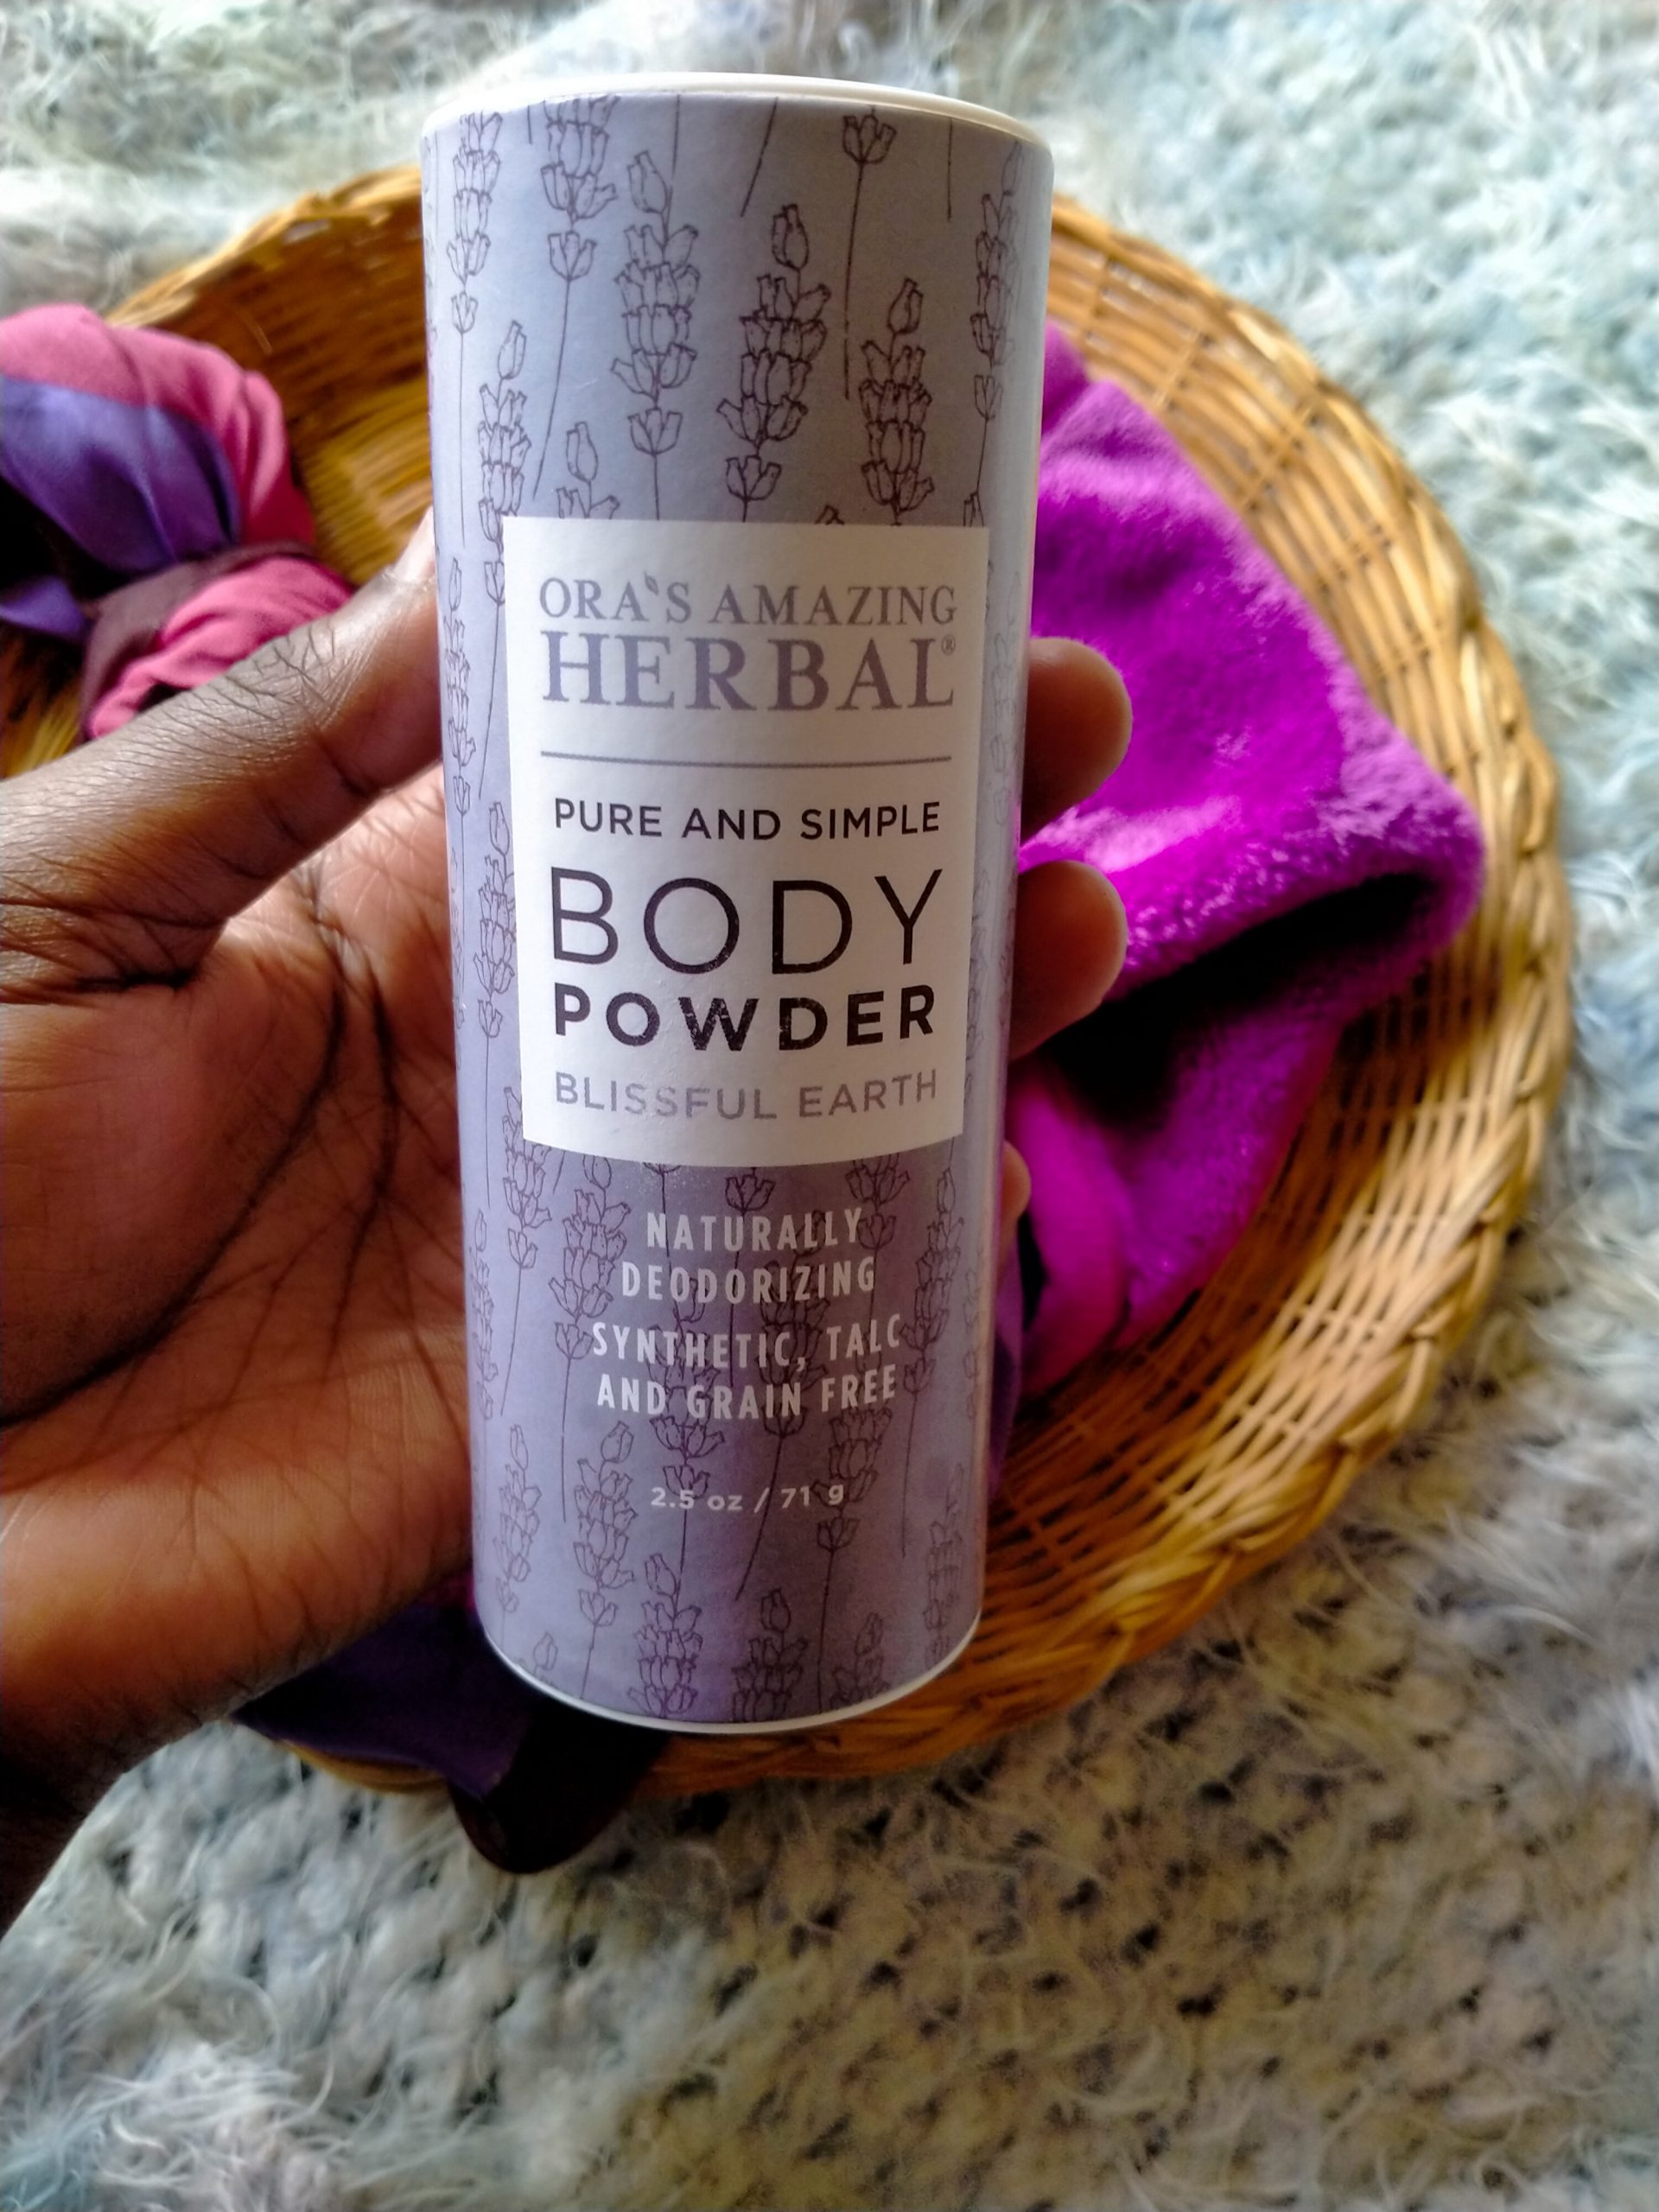 How To Use Body Powder- Ora’s Herbal Blissful Earth Body Powder Review